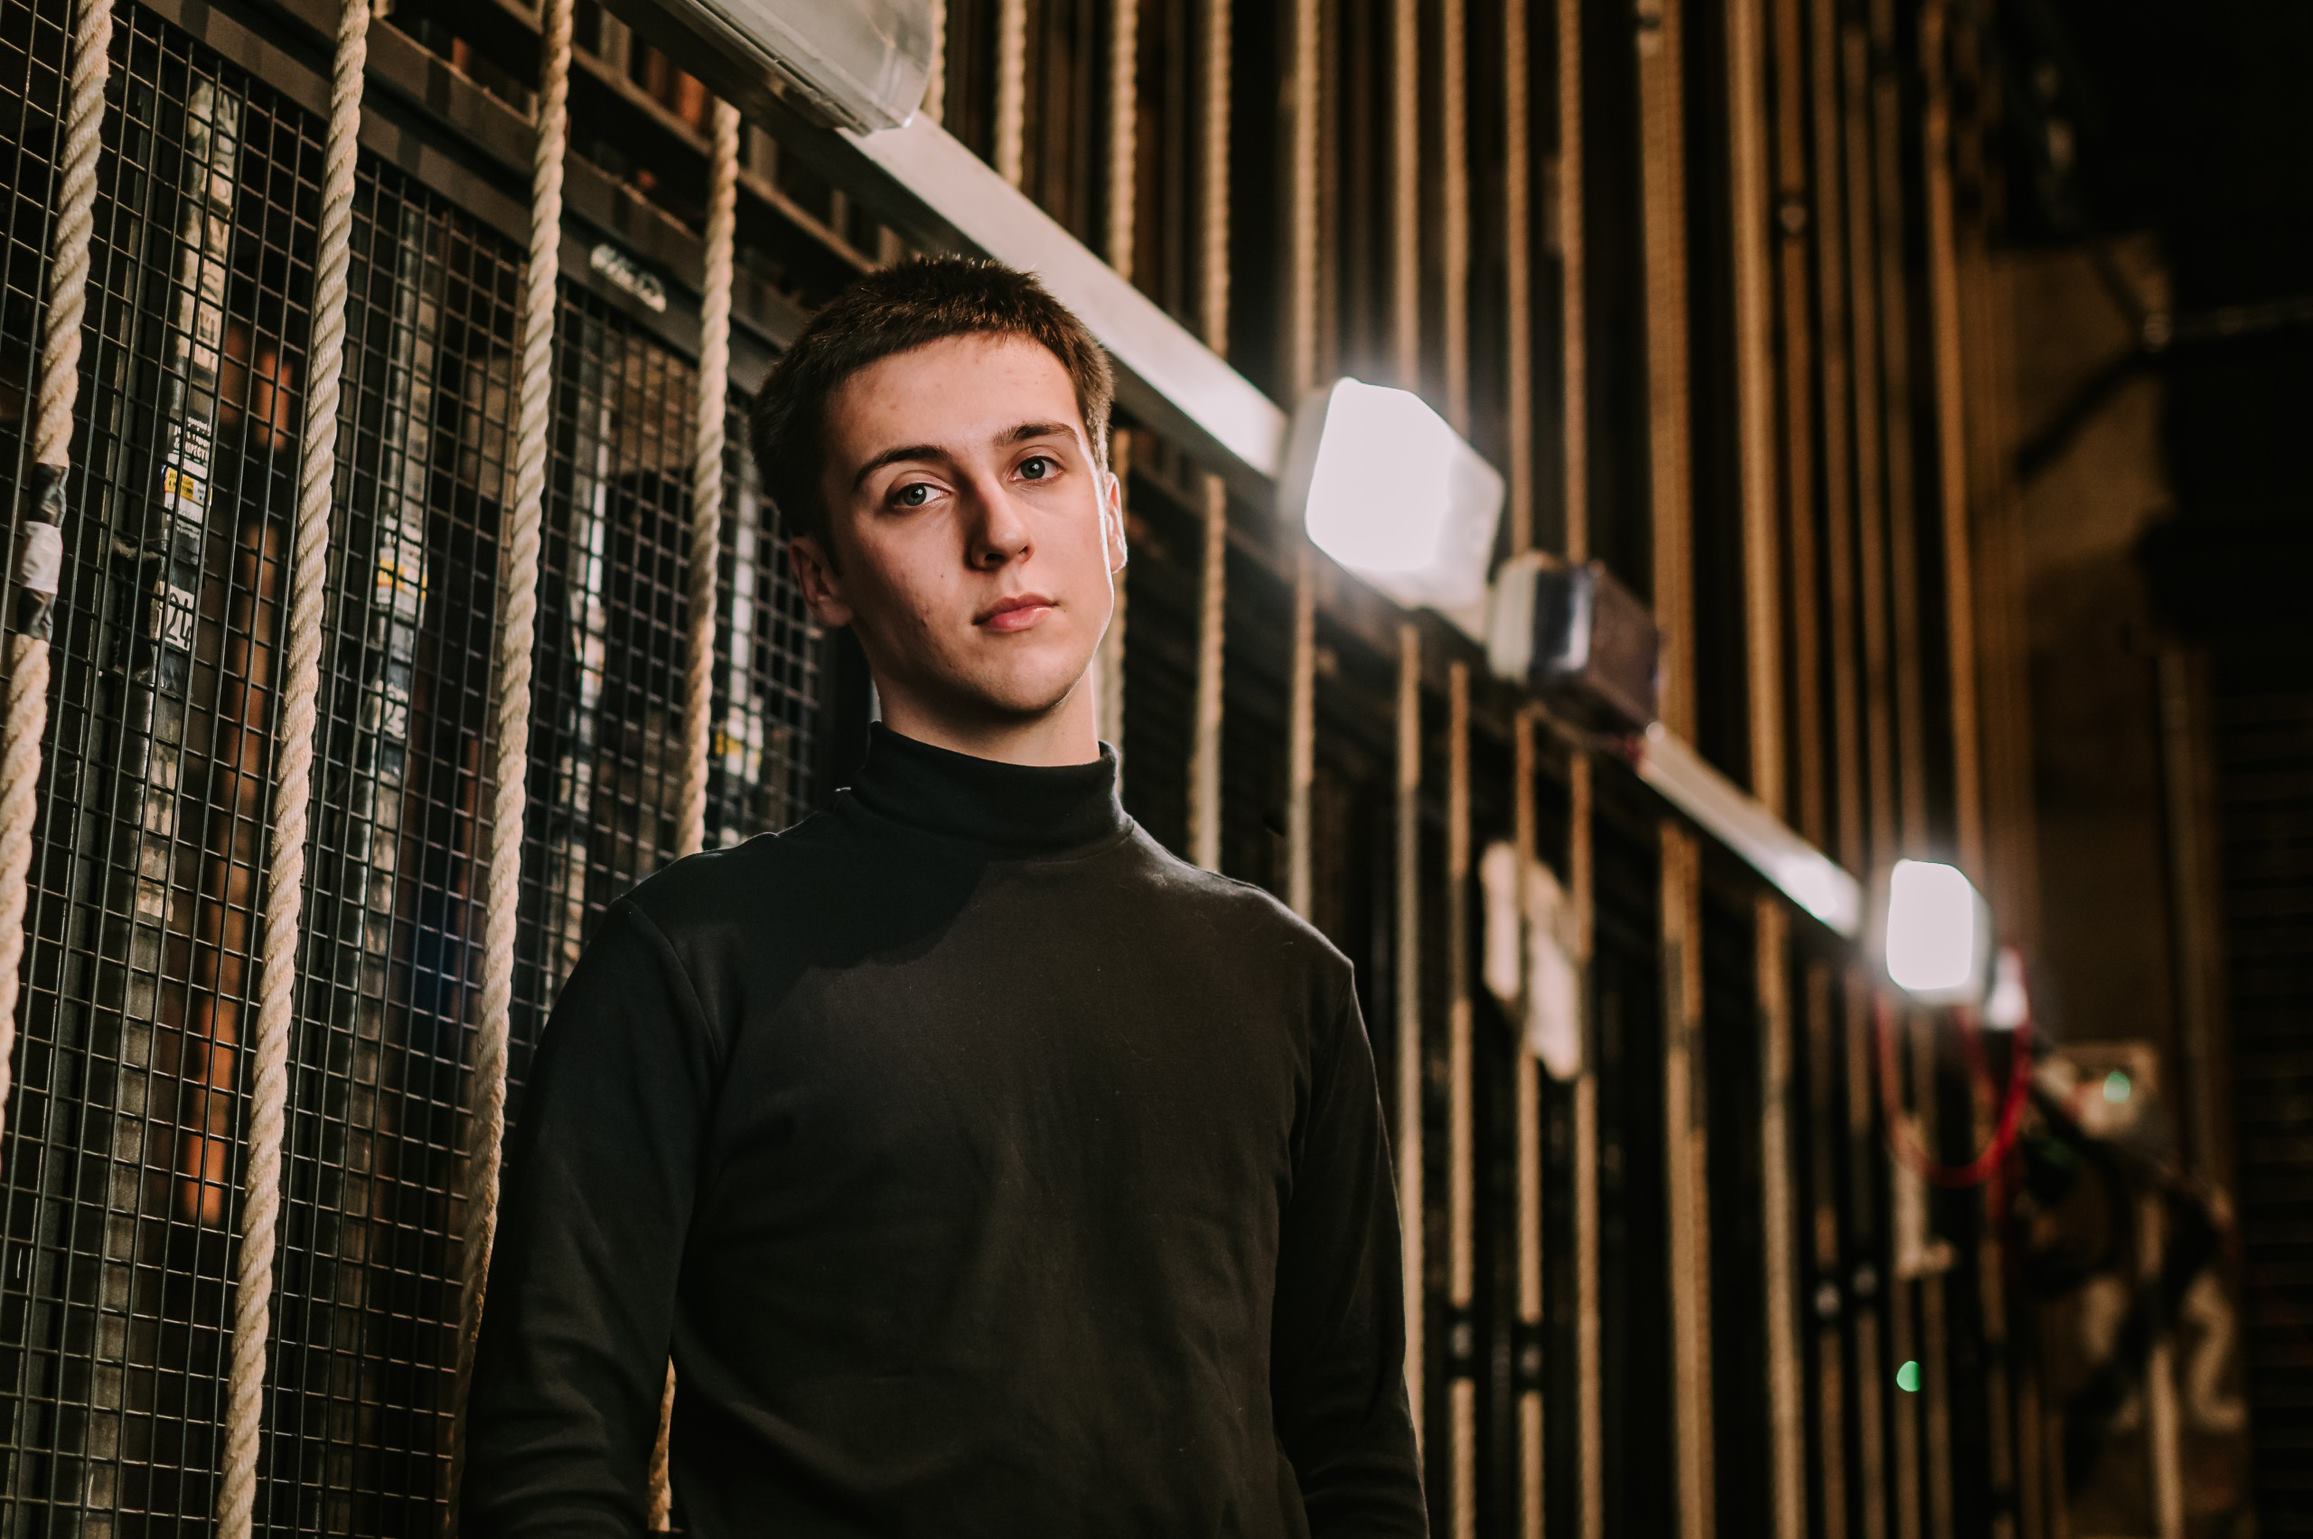 Young man in front of stage lighting